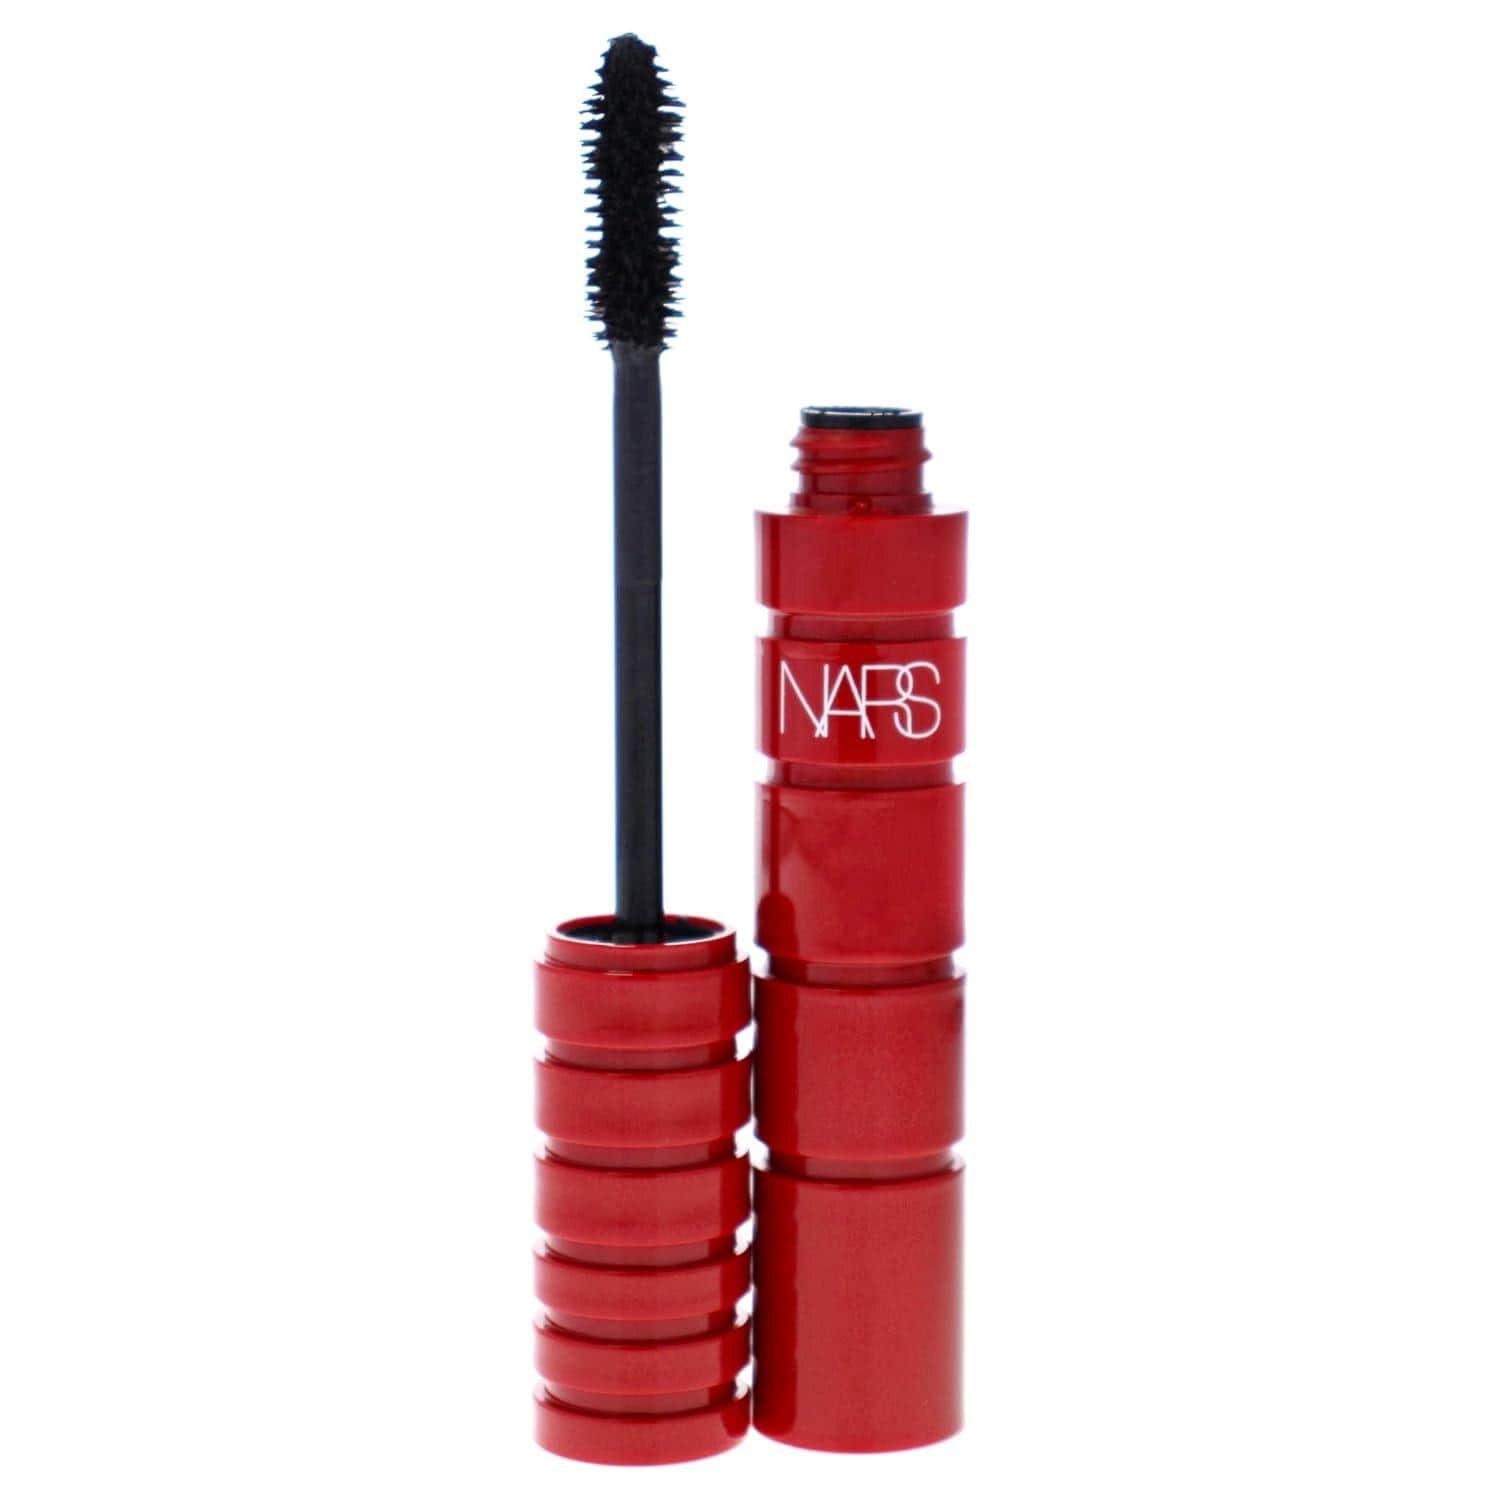 Nars's Climax Mascara has become my go-to for thin, wispy lashes, thanks to its buildable and flexible formula, defining it as a top choice in my collection of lengthening mascaras.